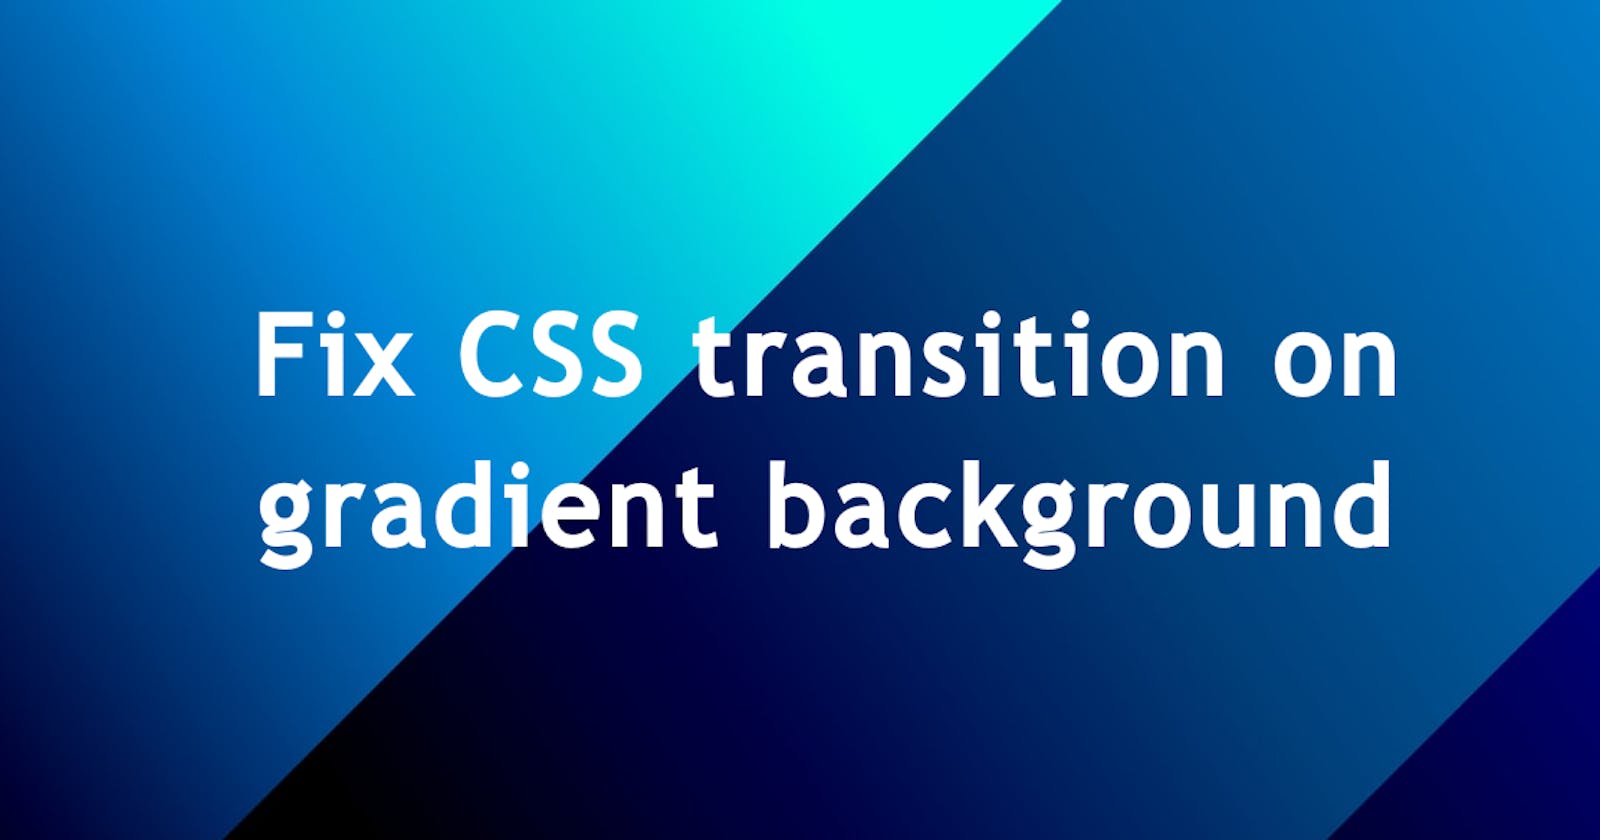 Fix CSS transition on gradient background